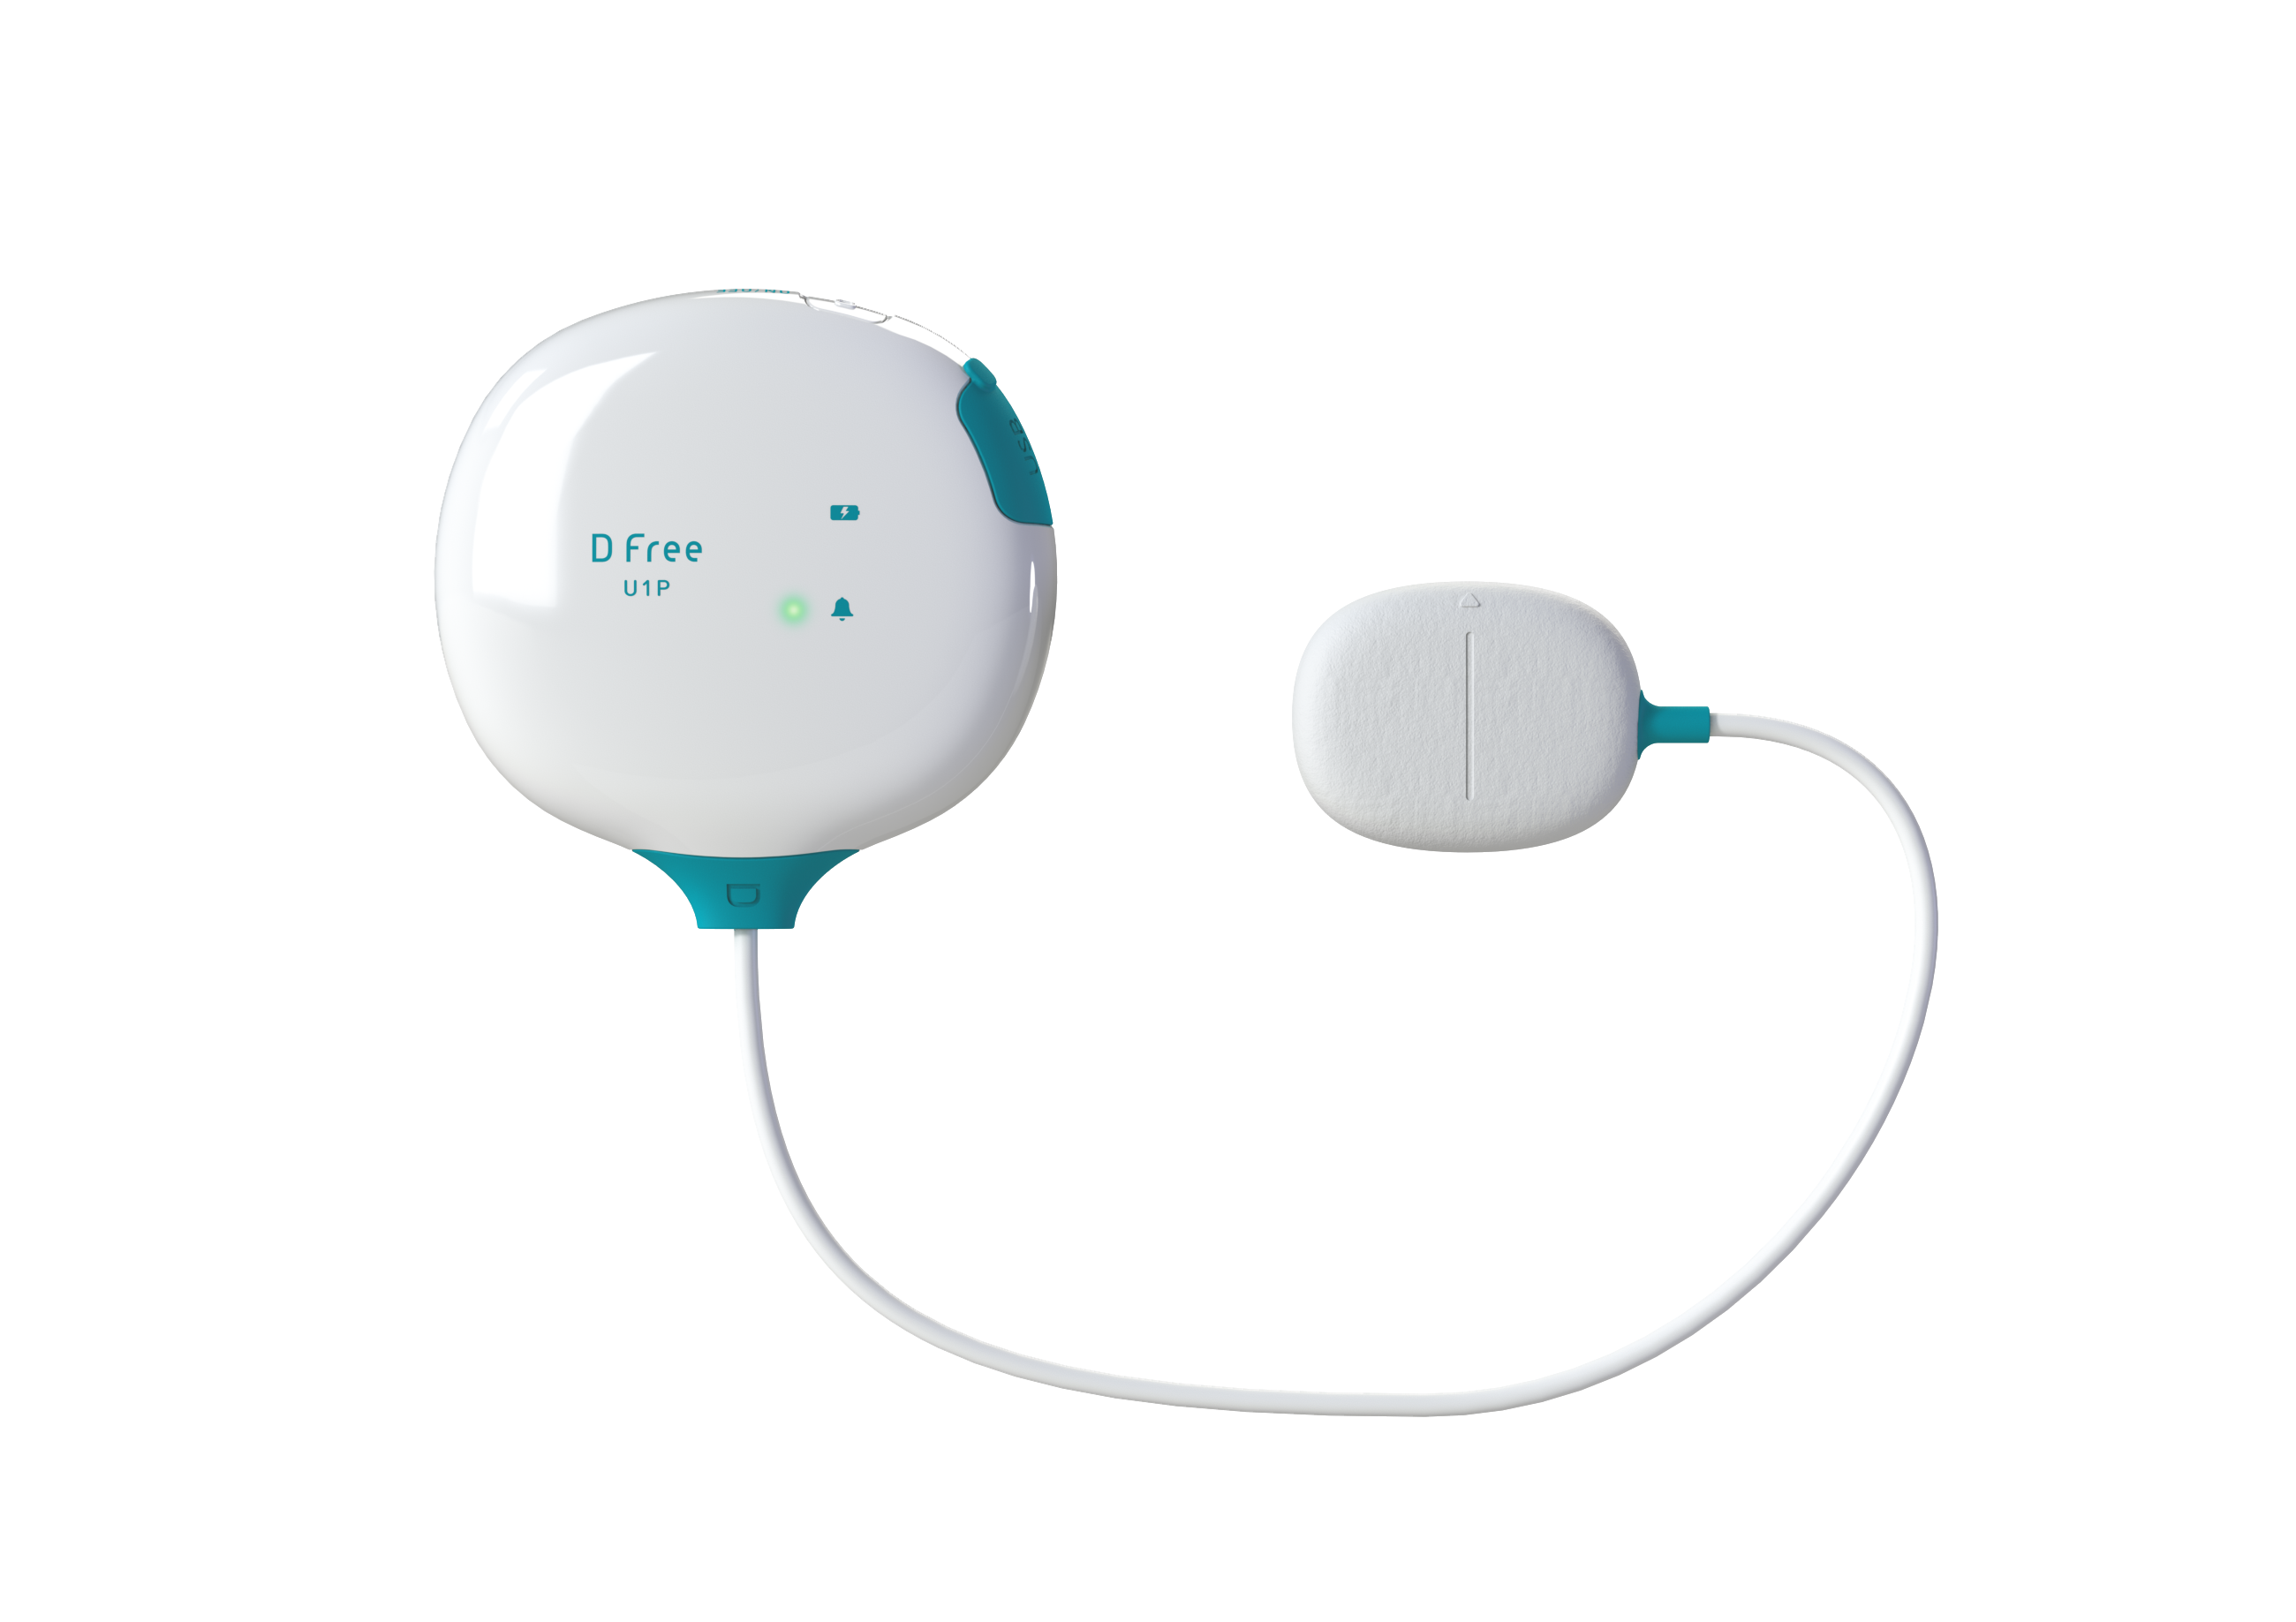 DFree Professional, a non-invasive wearable device that monitors bladder with ultrasound sensor and sends notification to caregiver’s smartphone/tablet when their patients need to go to the bathroom.